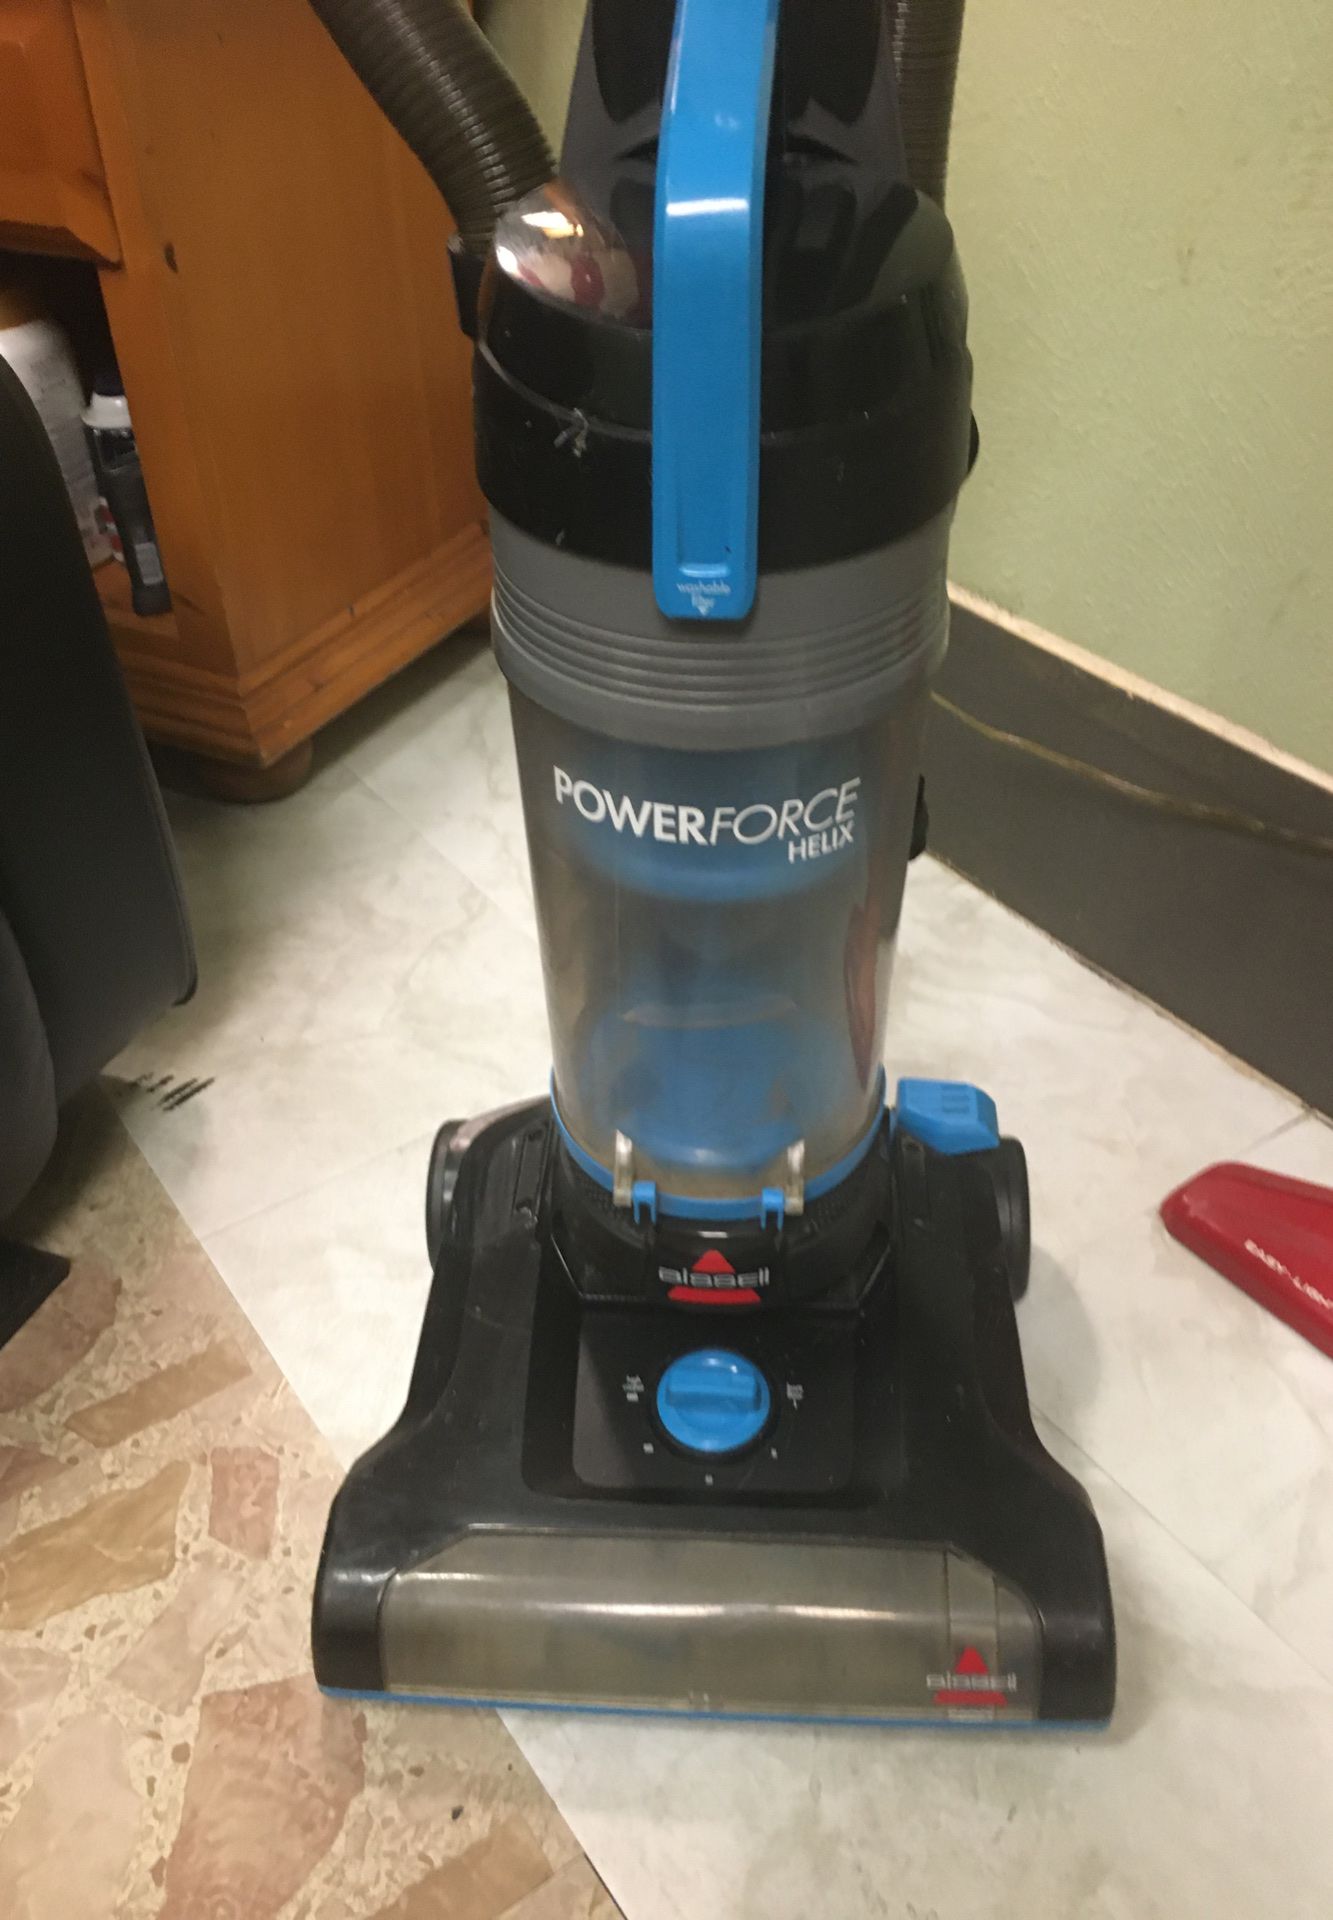 Bissell Powerforce Helix vacuum cleaner